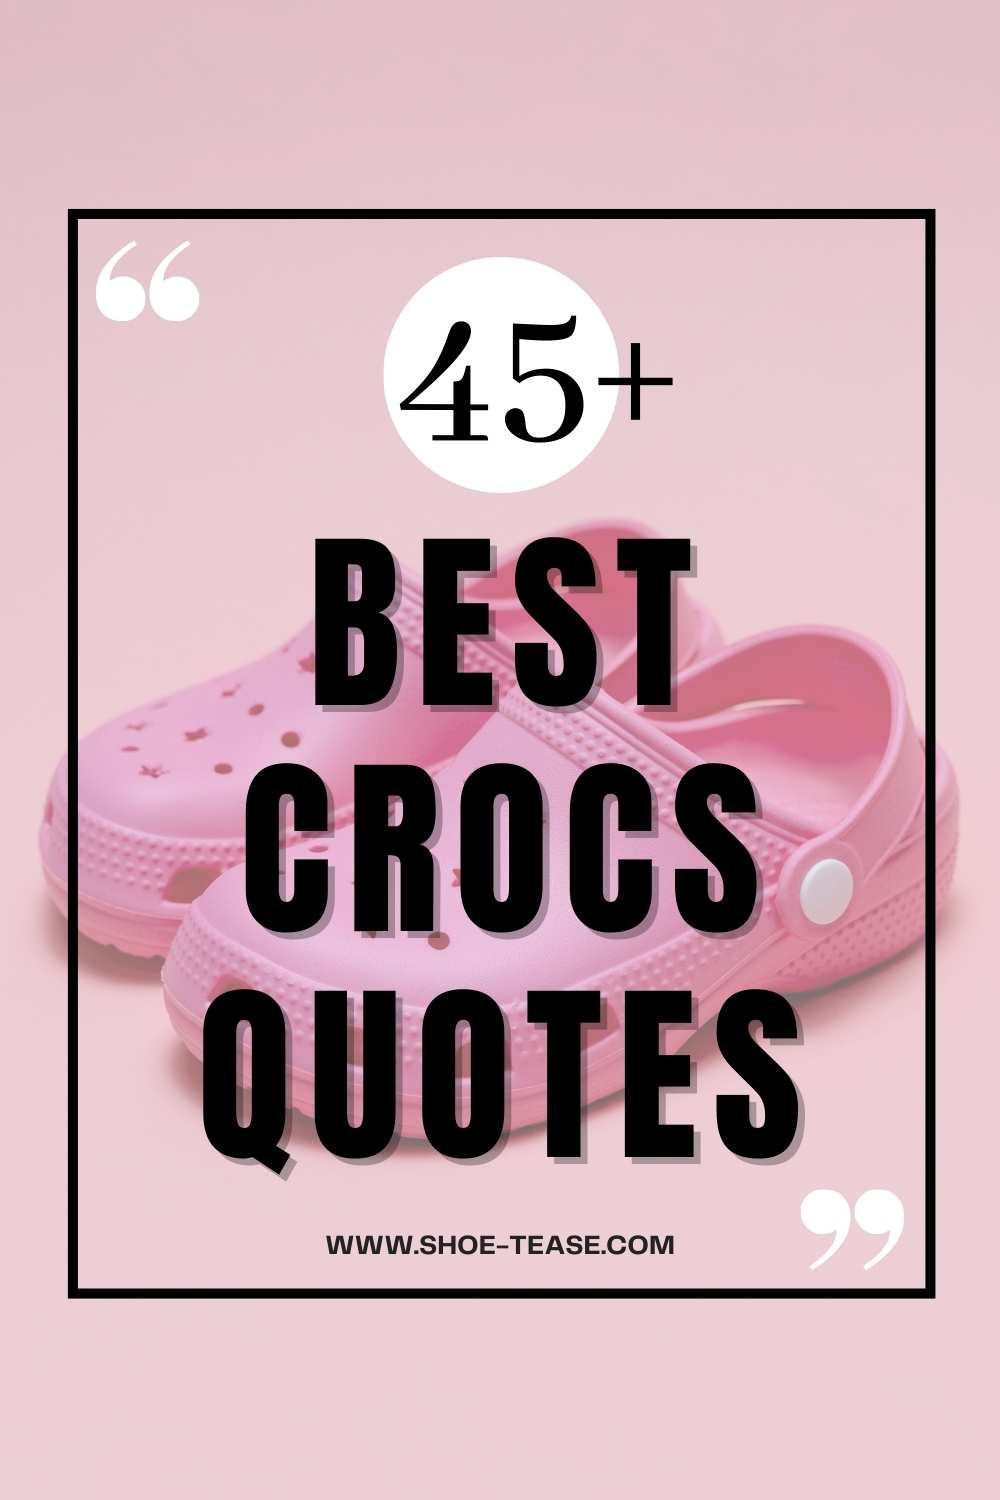 Collage of text reading 45 best crocs quotes over image of pink crocs shoes.